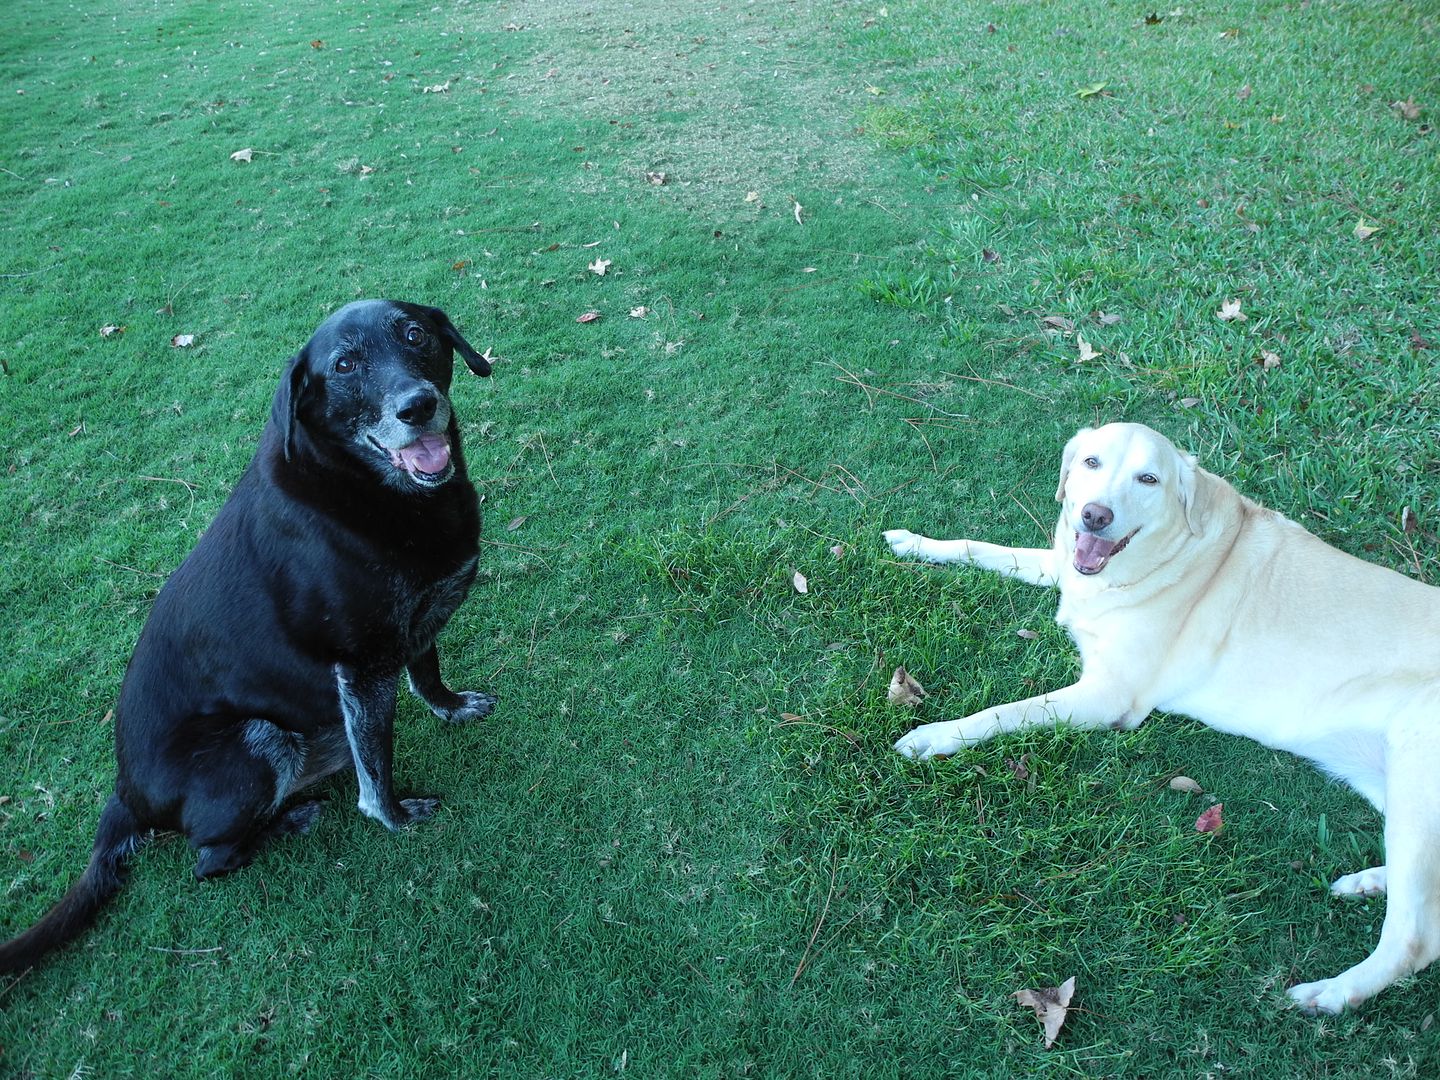 Buddy and Willow hanging out in the yard on vacation in HH.